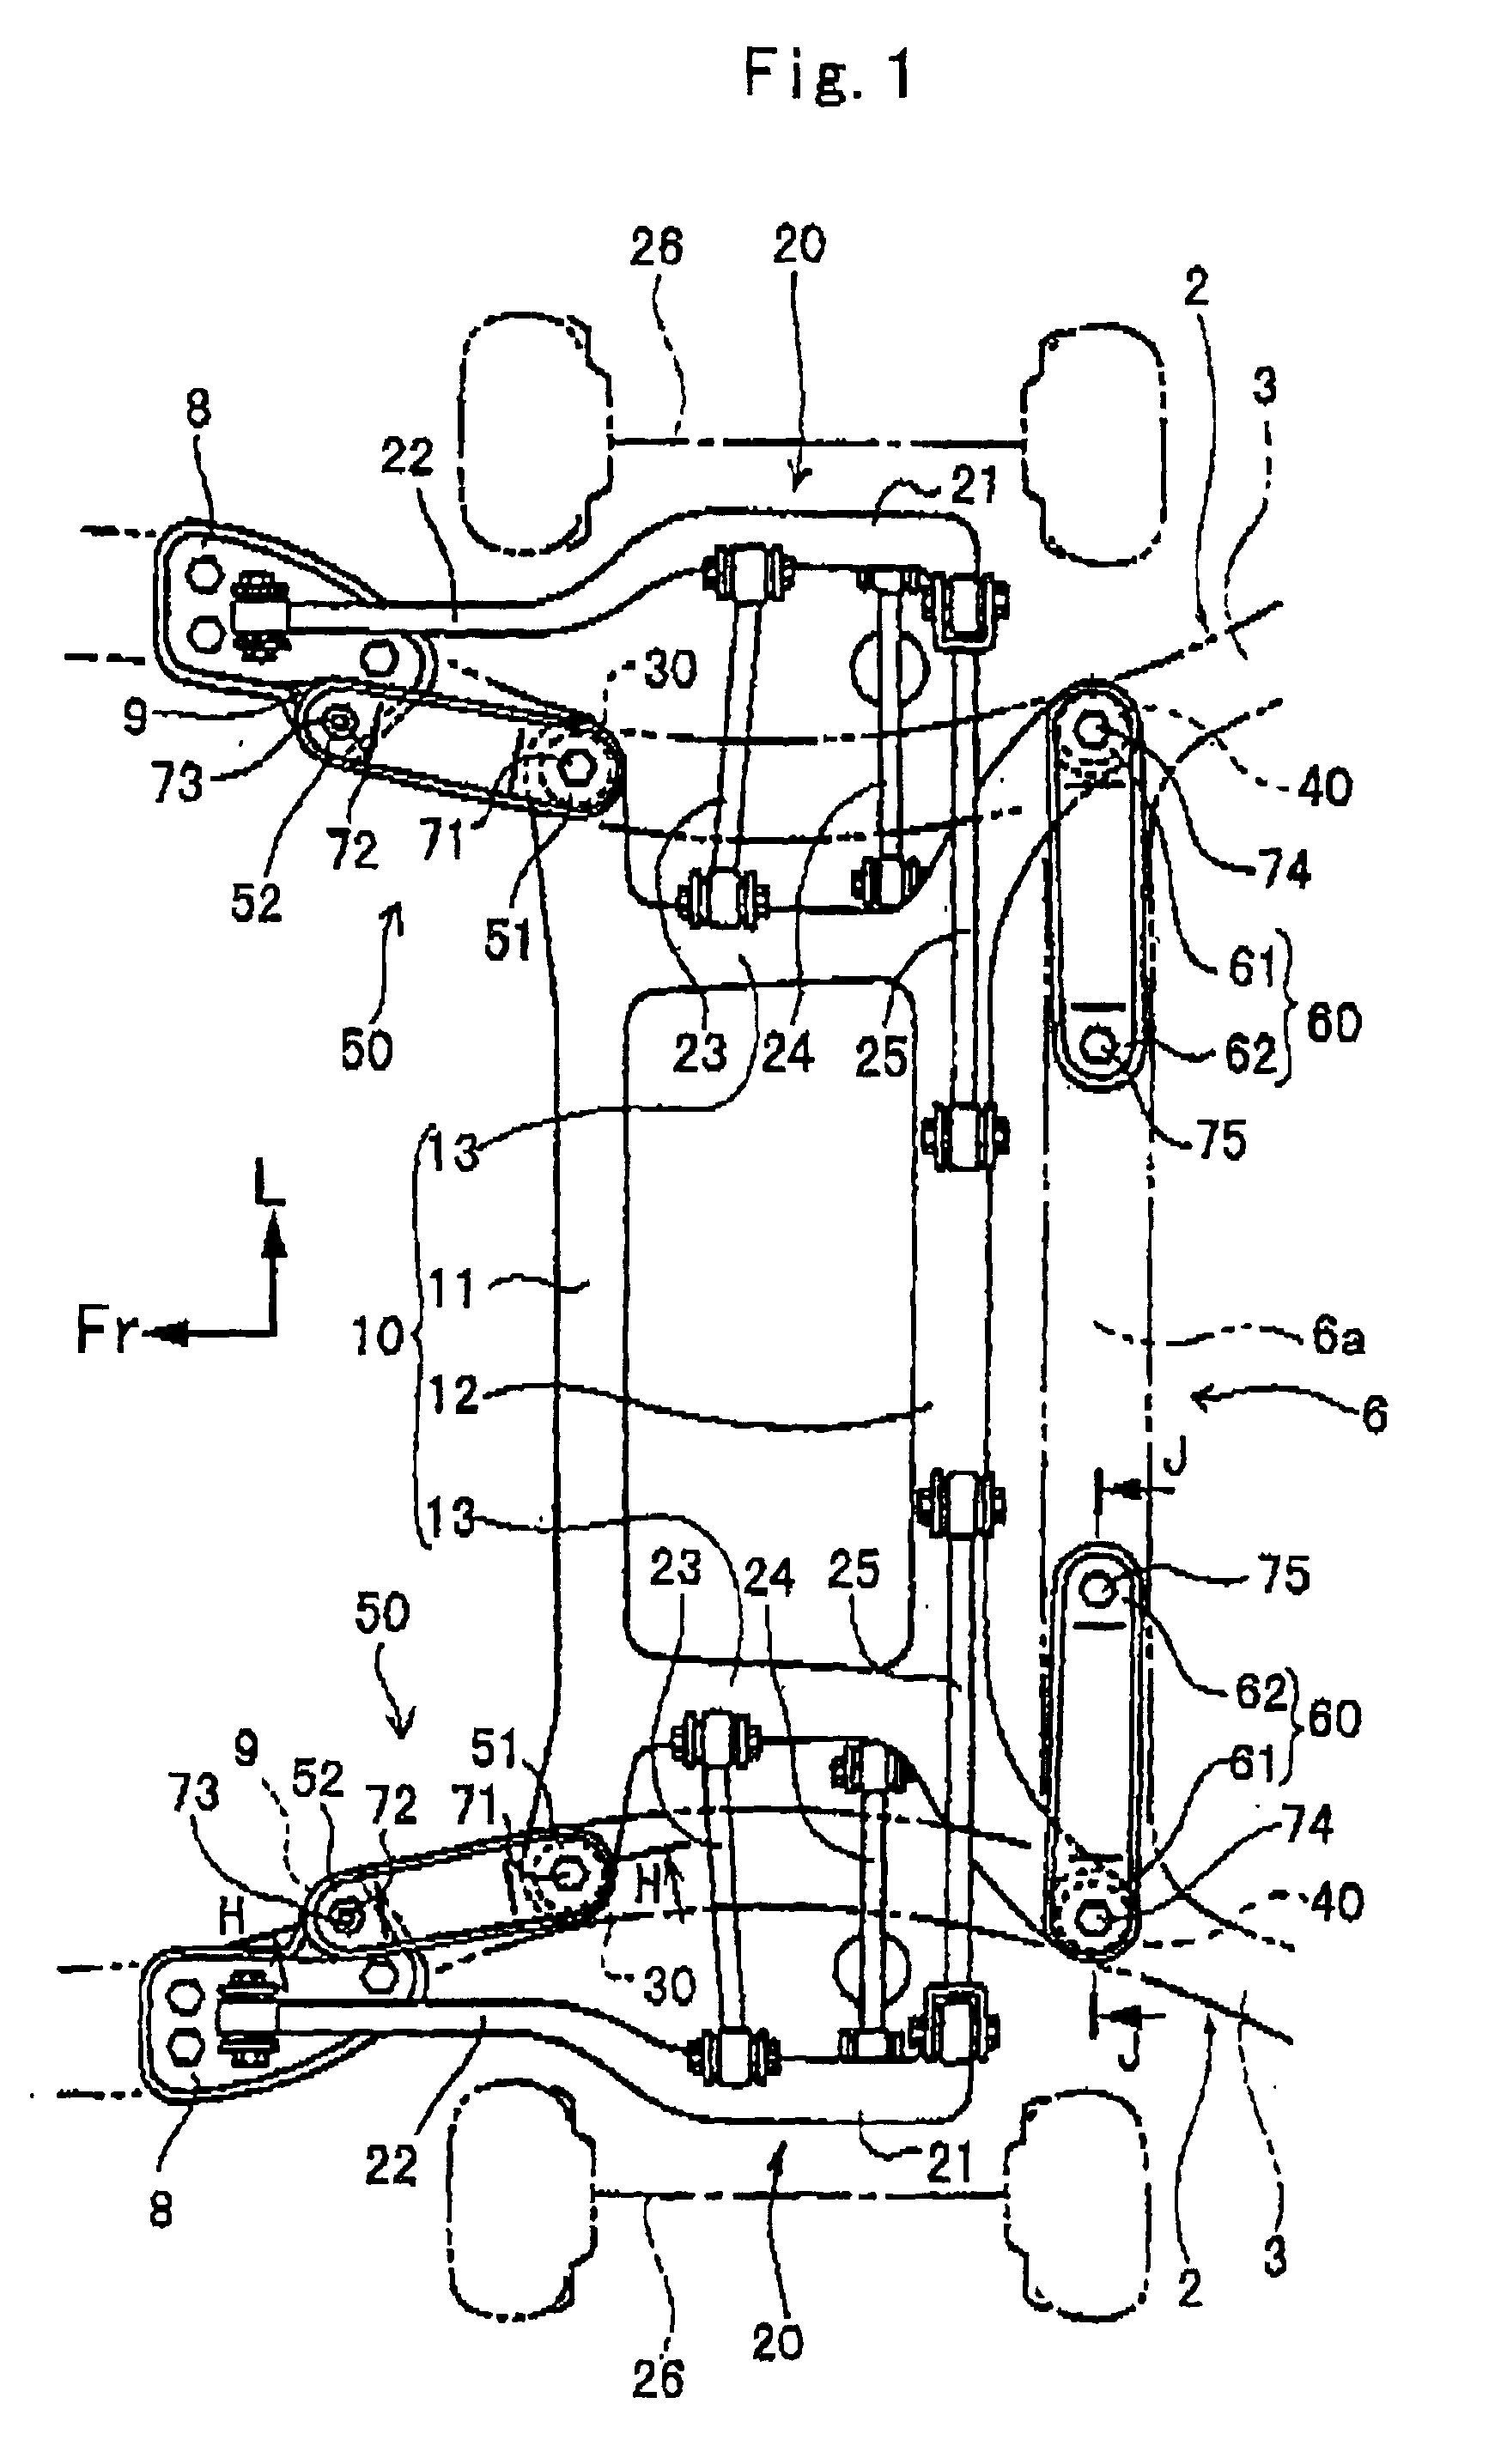 Supporting structure of sub-frame in suspension system for vehicle